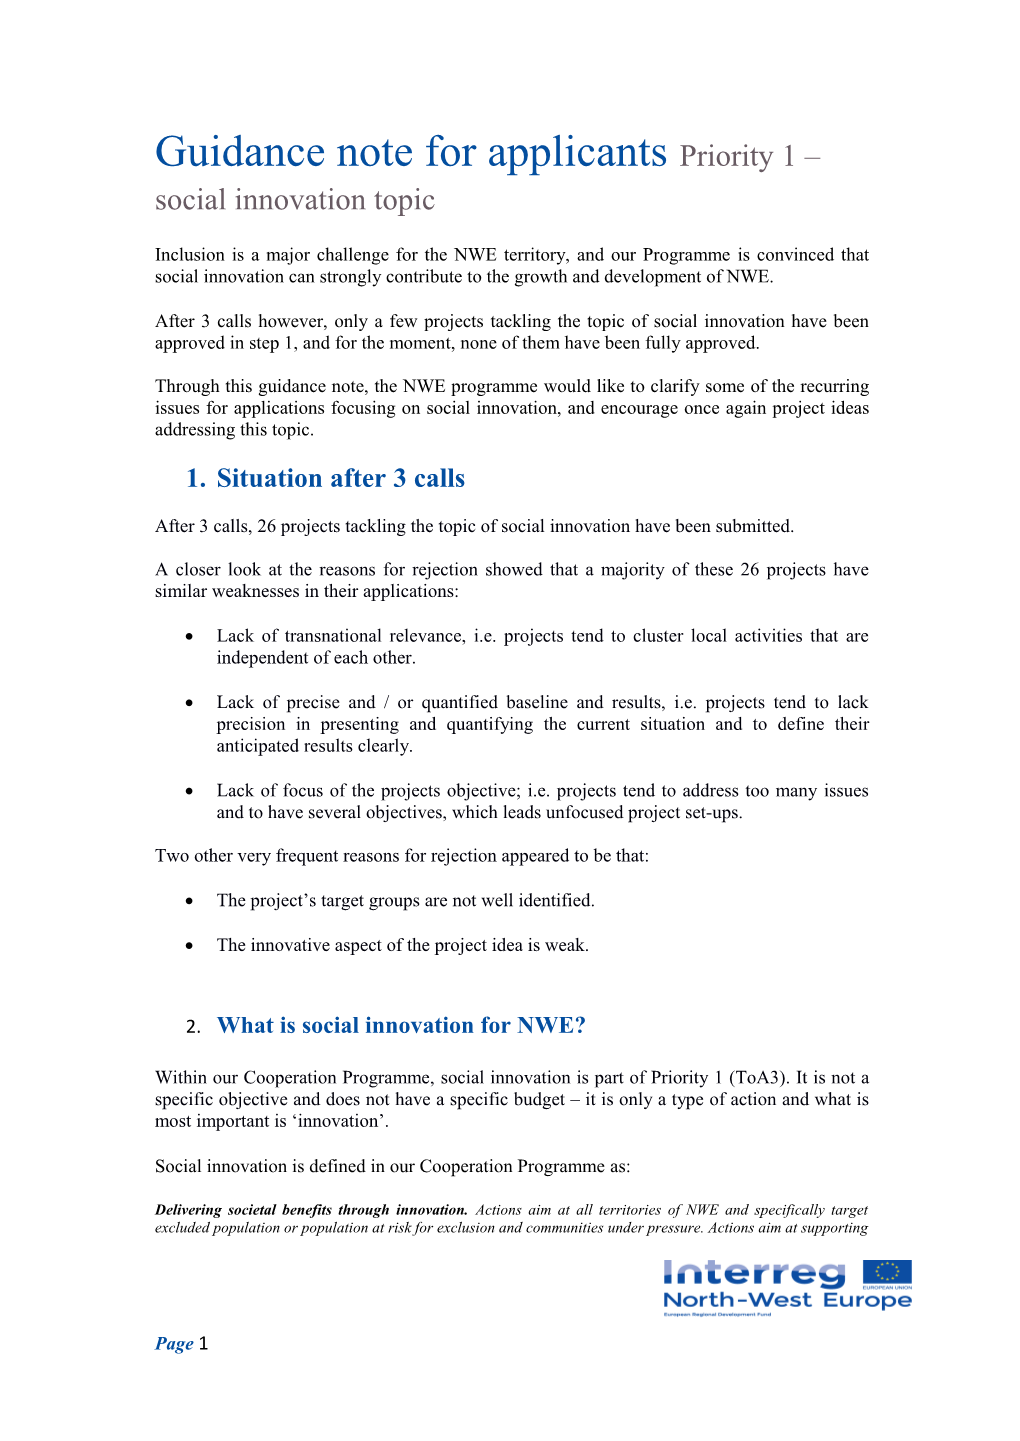 Guidance Note for Applicants Priority 1 Social Innovation Topic